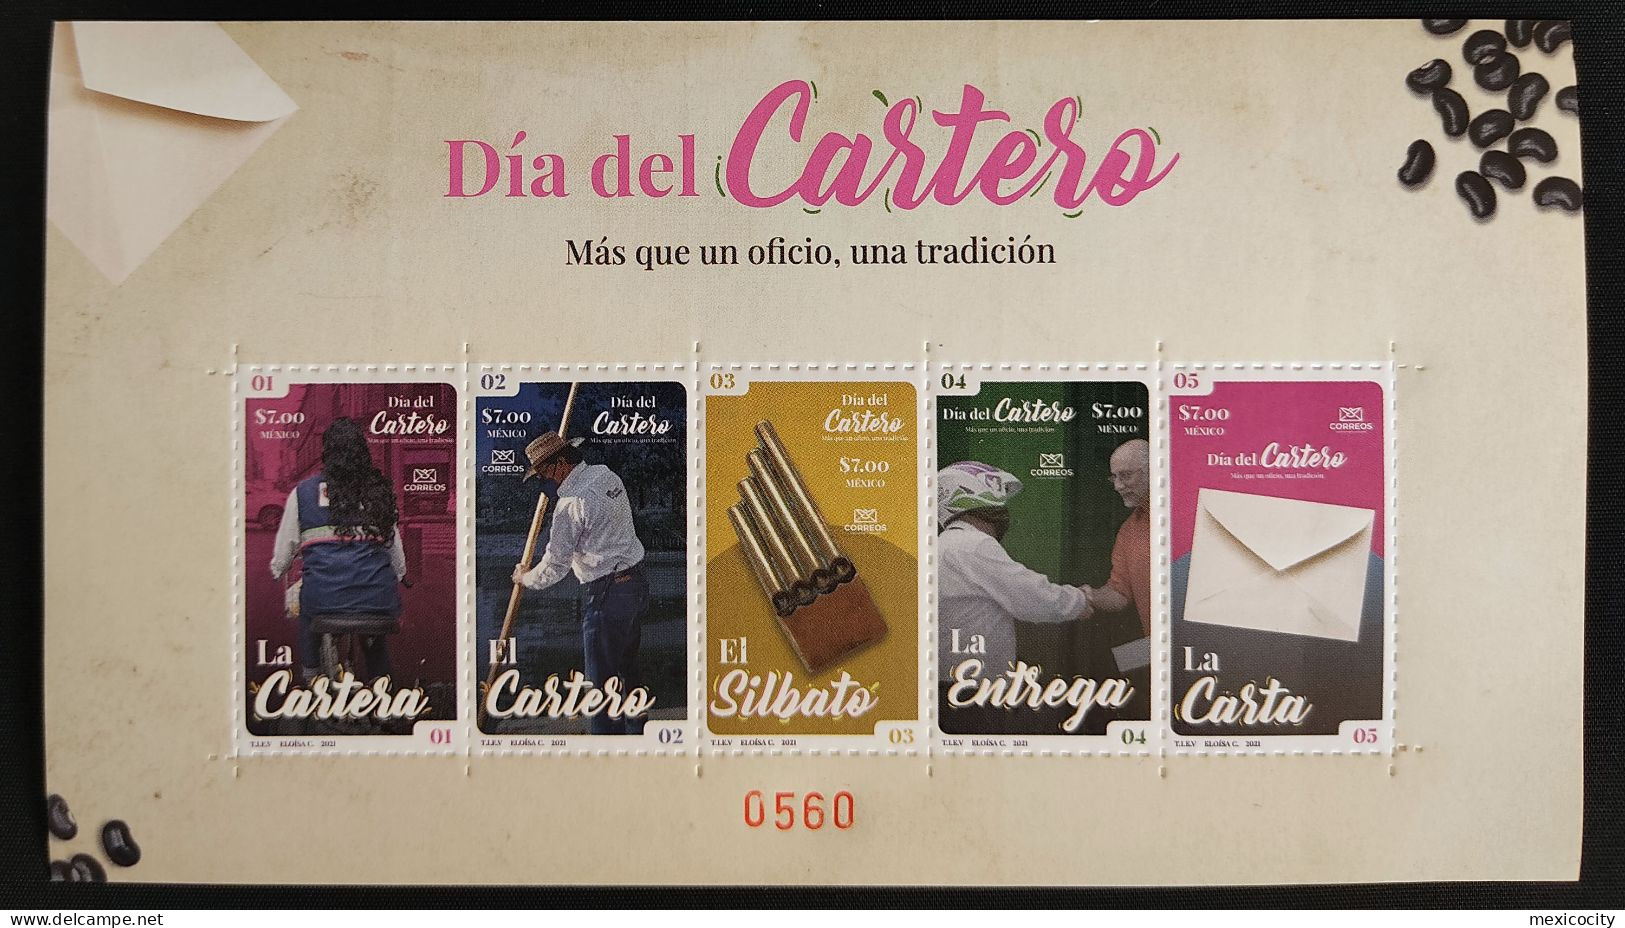 MEXICO 2021 CARTER DAY - Carter W/ Covid Mask 5 Stamp Self Adh. BLOC COLLECTOR Mint + See Img. - Mexico